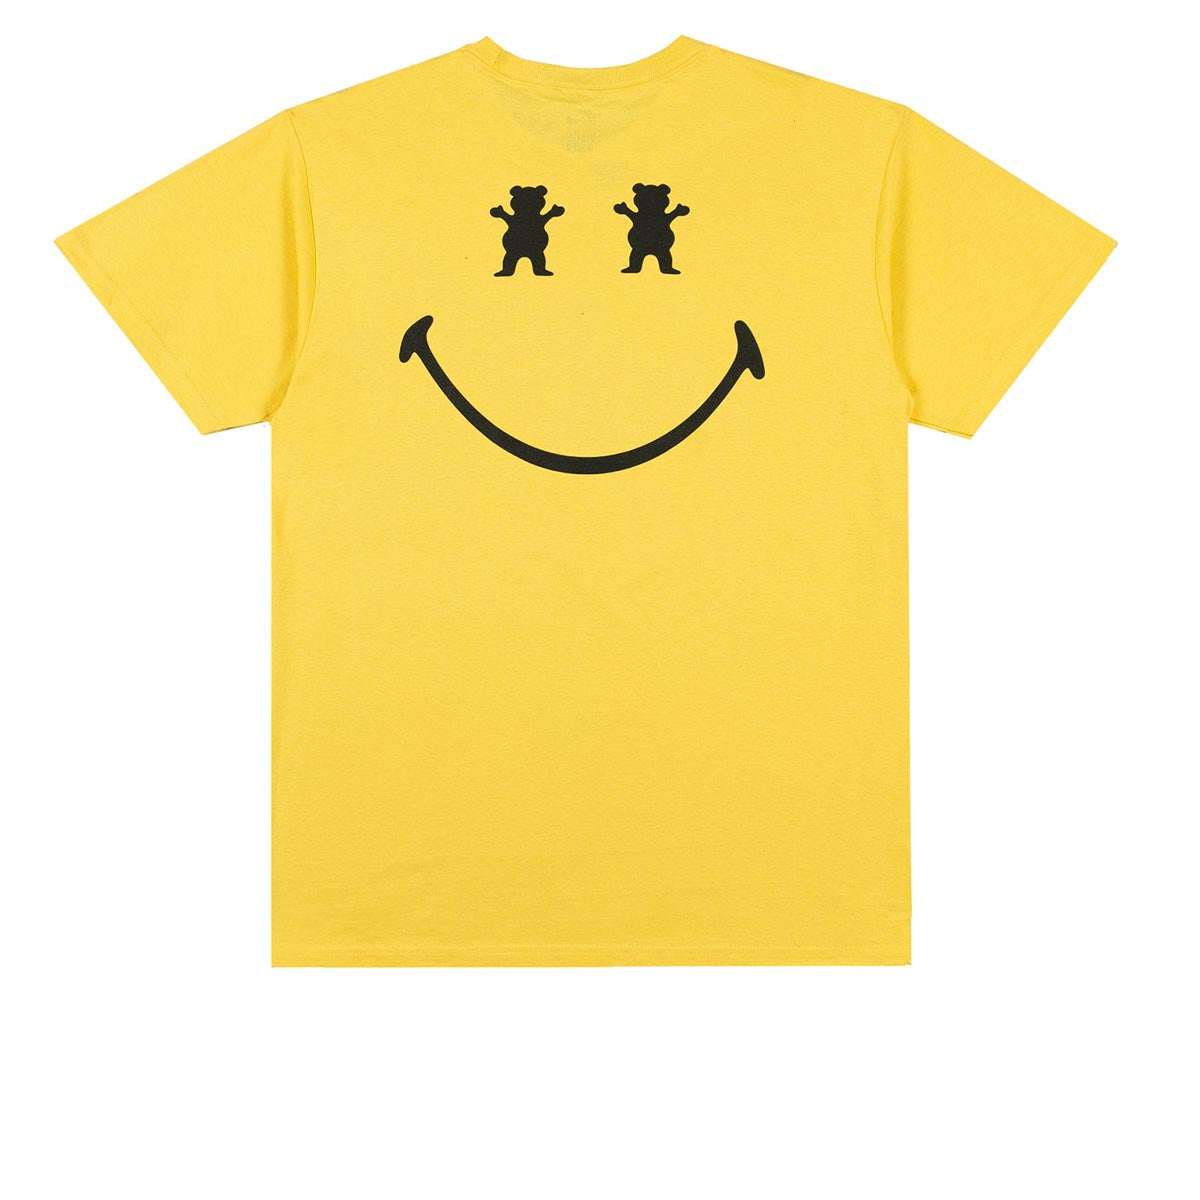 Grizzly x Smiley World Big Smile T-Shirt - Yellow image 2